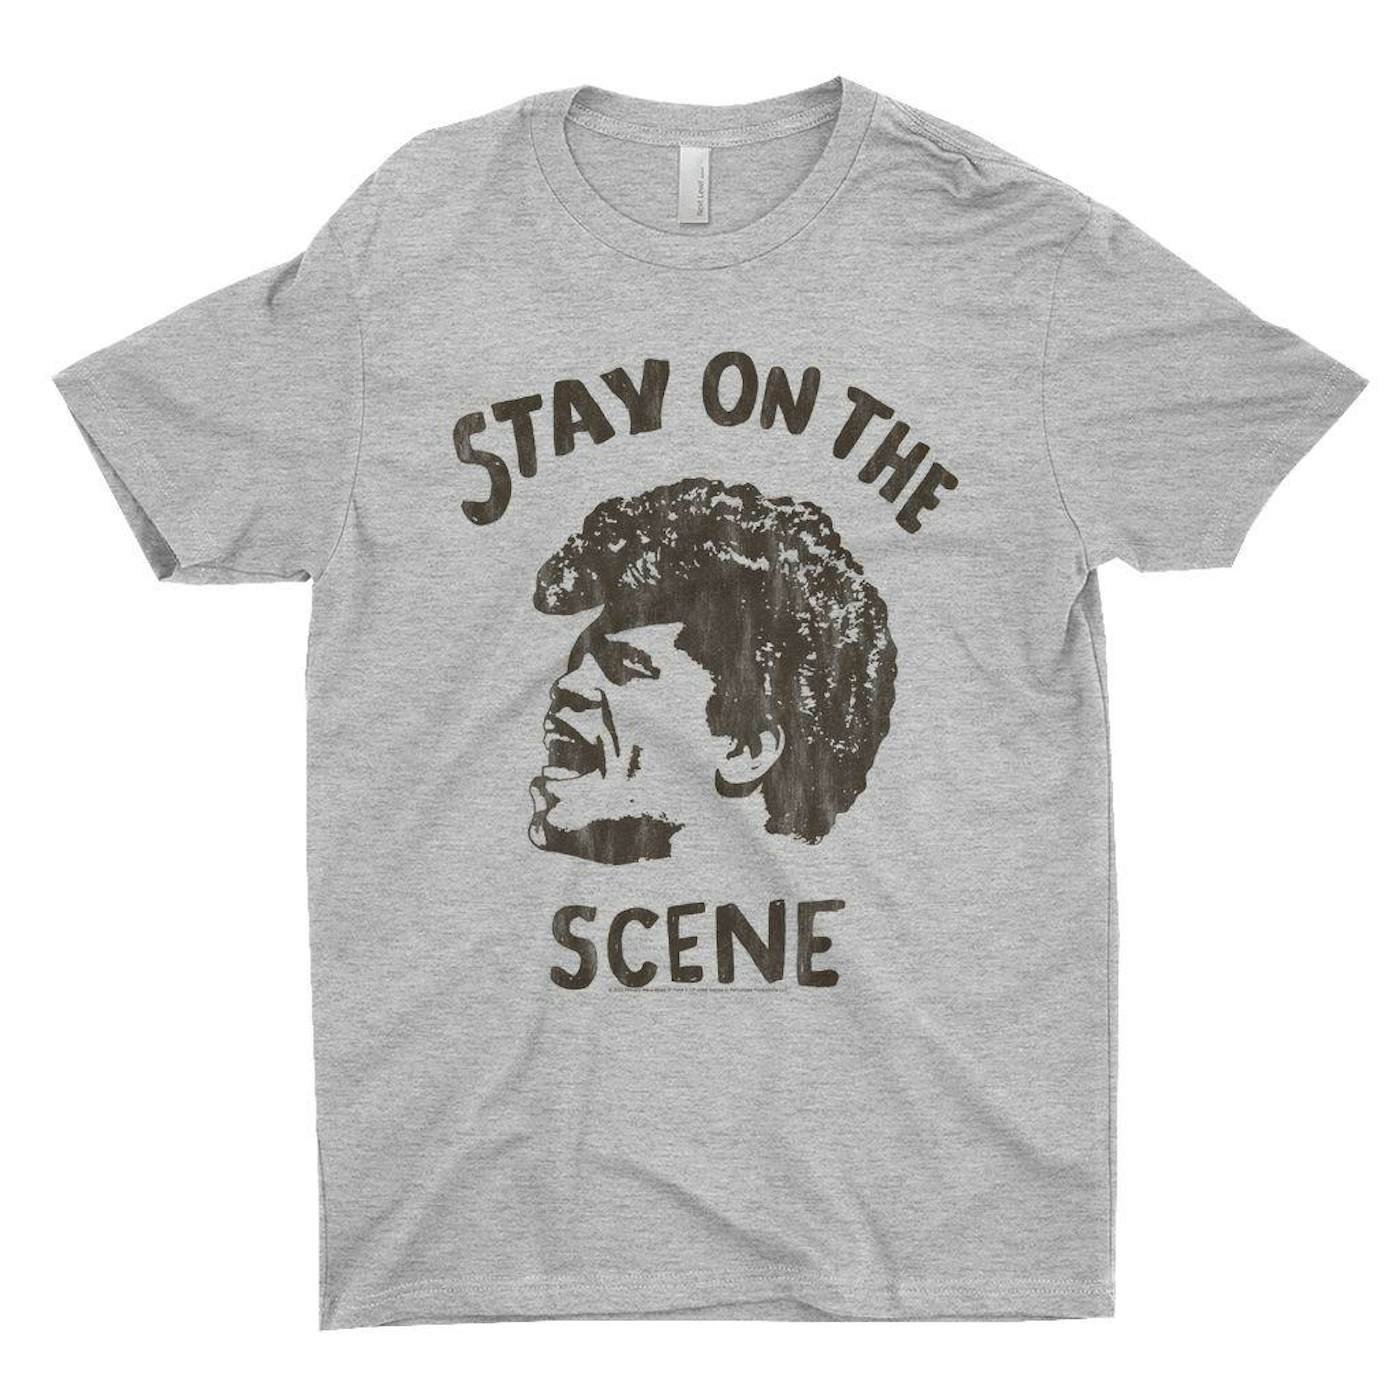 James Brown T-Shirt | Stay On The Scene Sketch James Brown Shirt